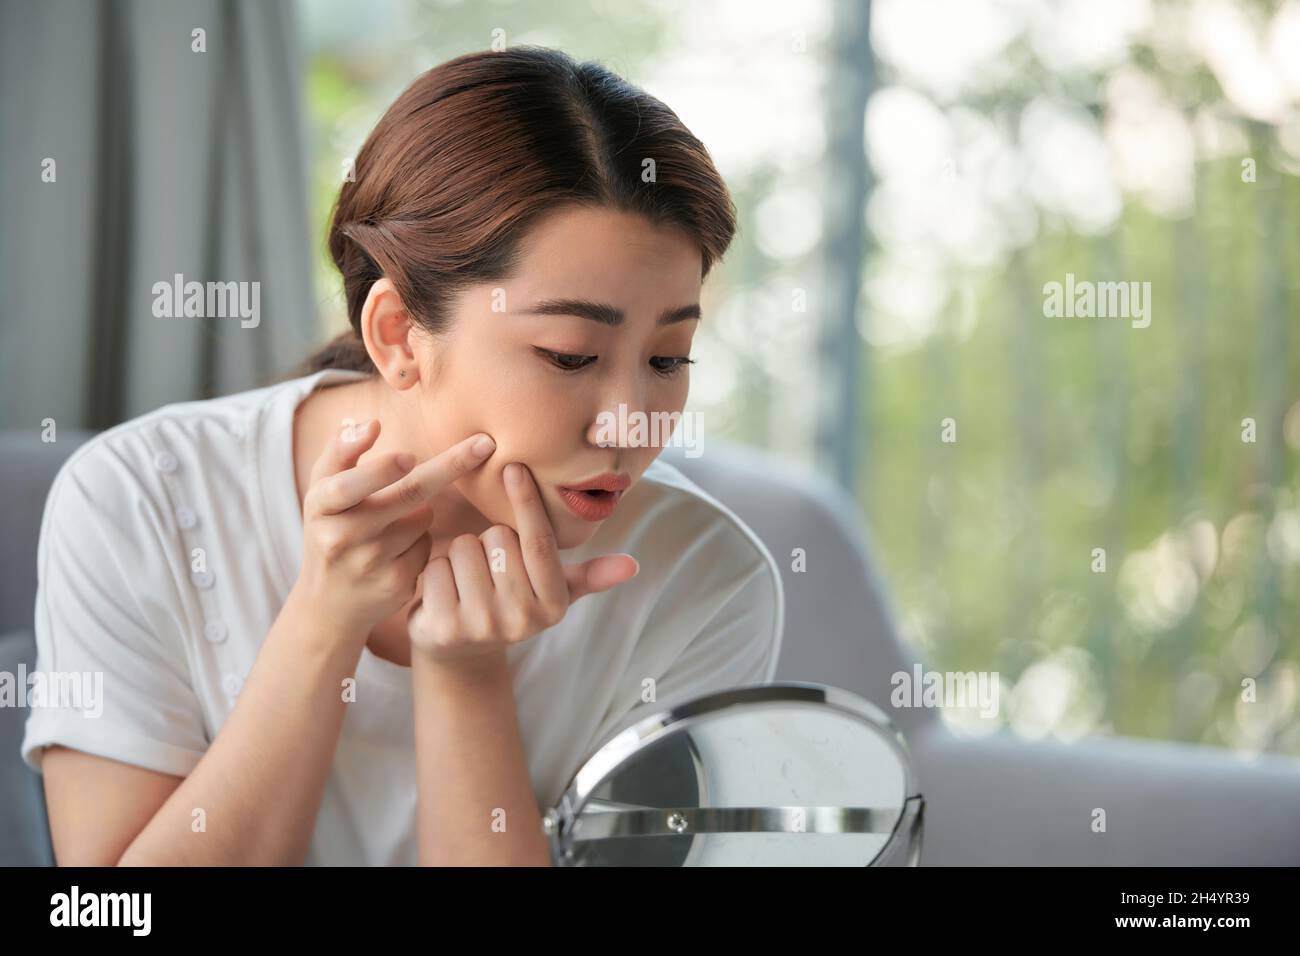 Woman examining her face in the mirror, problematic acne-prone skin concept Stock Photo